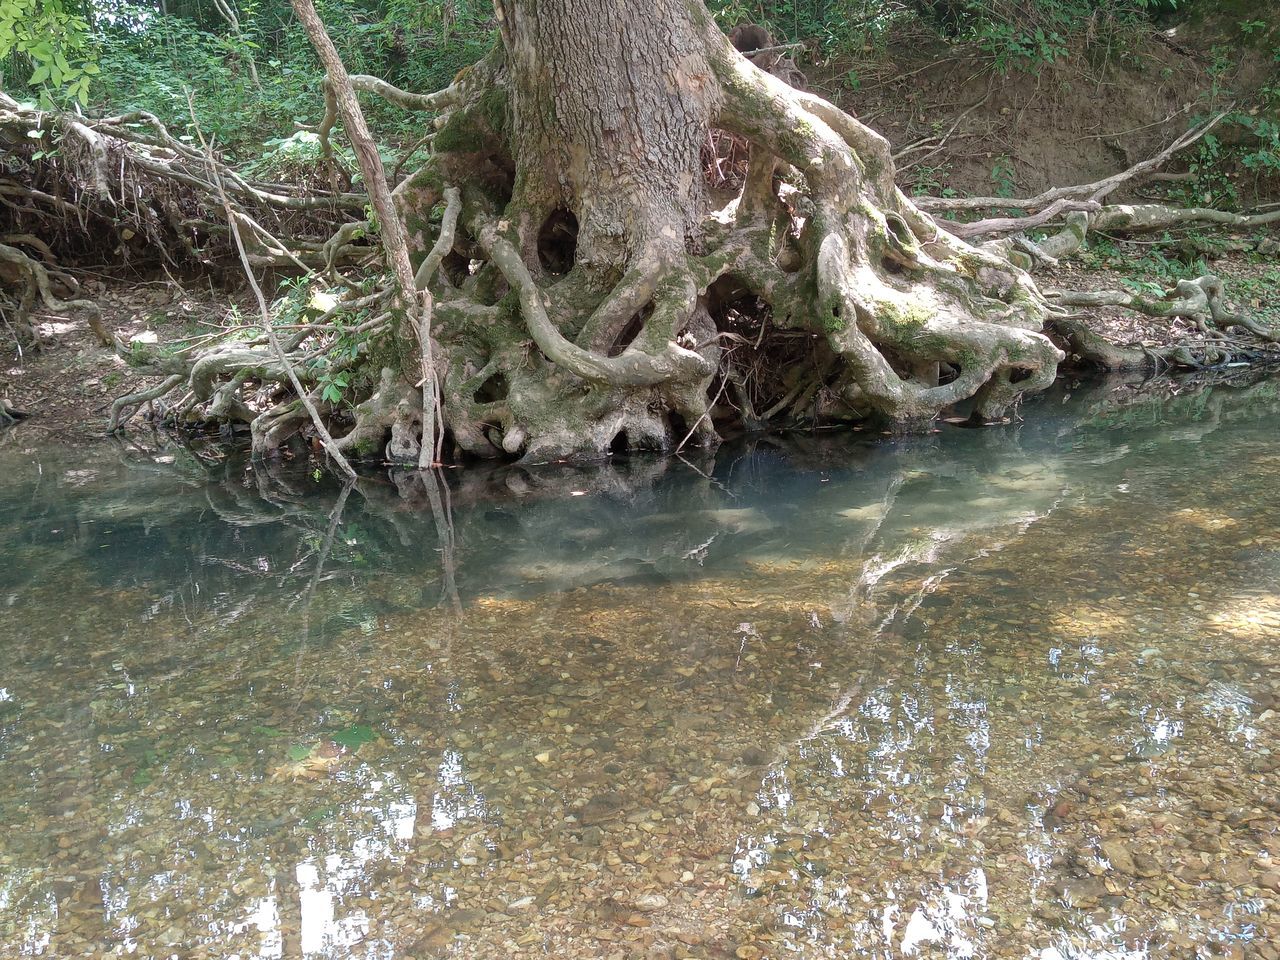 tree, plant, water, nature, day, no people, tranquility, forest, land, beauty in nature, root, swamp, river, wetland, growth, wildlife, trunk, outdoors, tree trunk, waterfront, branch, non-urban scene, stream, woodland, fallen tree, tranquil scene, wilderness, reflection, scenics - nature, natural environment, falling